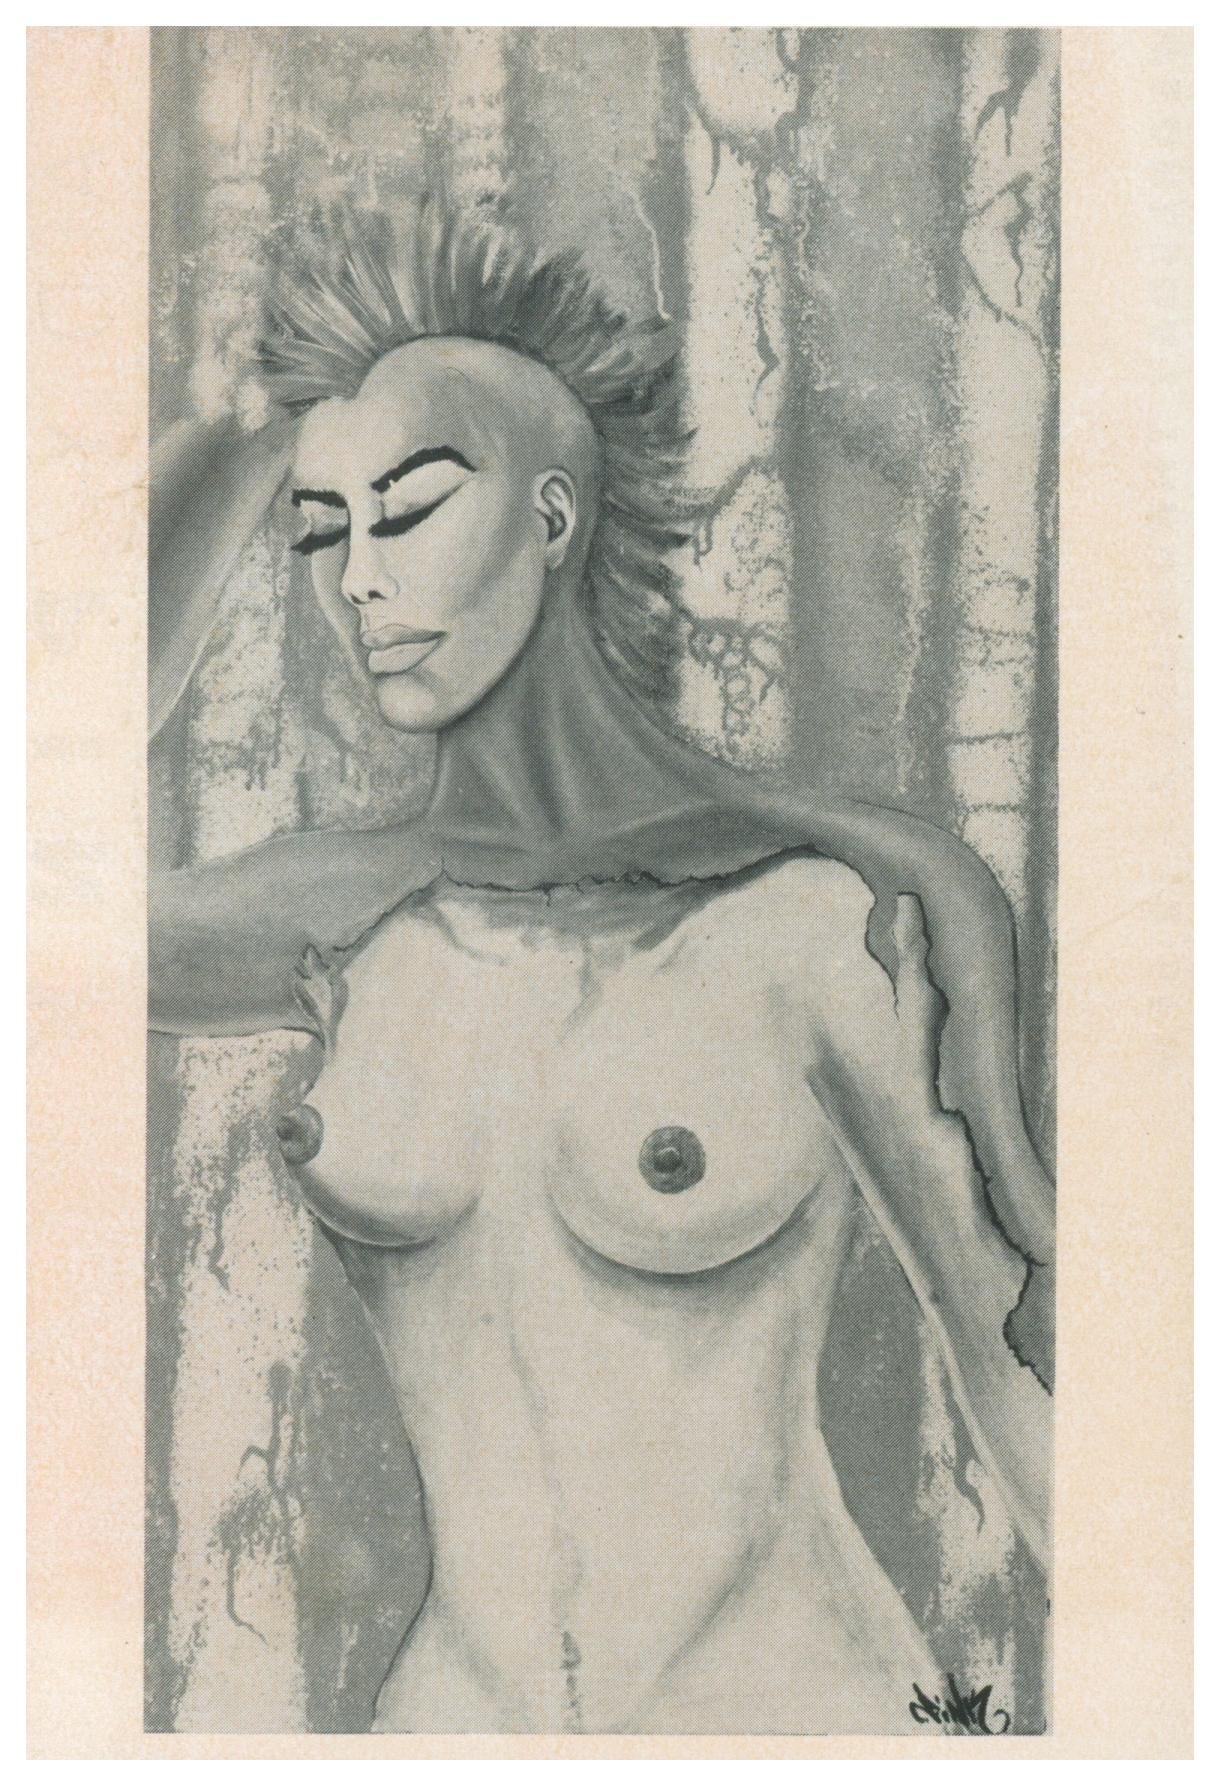 Lady Pink Semaphore East, 1985:
Rare original 1985 gallery announcement illustrated by graffiti legend, Lady Pink on the occasion of her solo exhibition at Semaphore East: Ave B, New York, NY: February 23-March 24, 1985.

Offset printed; 6x4